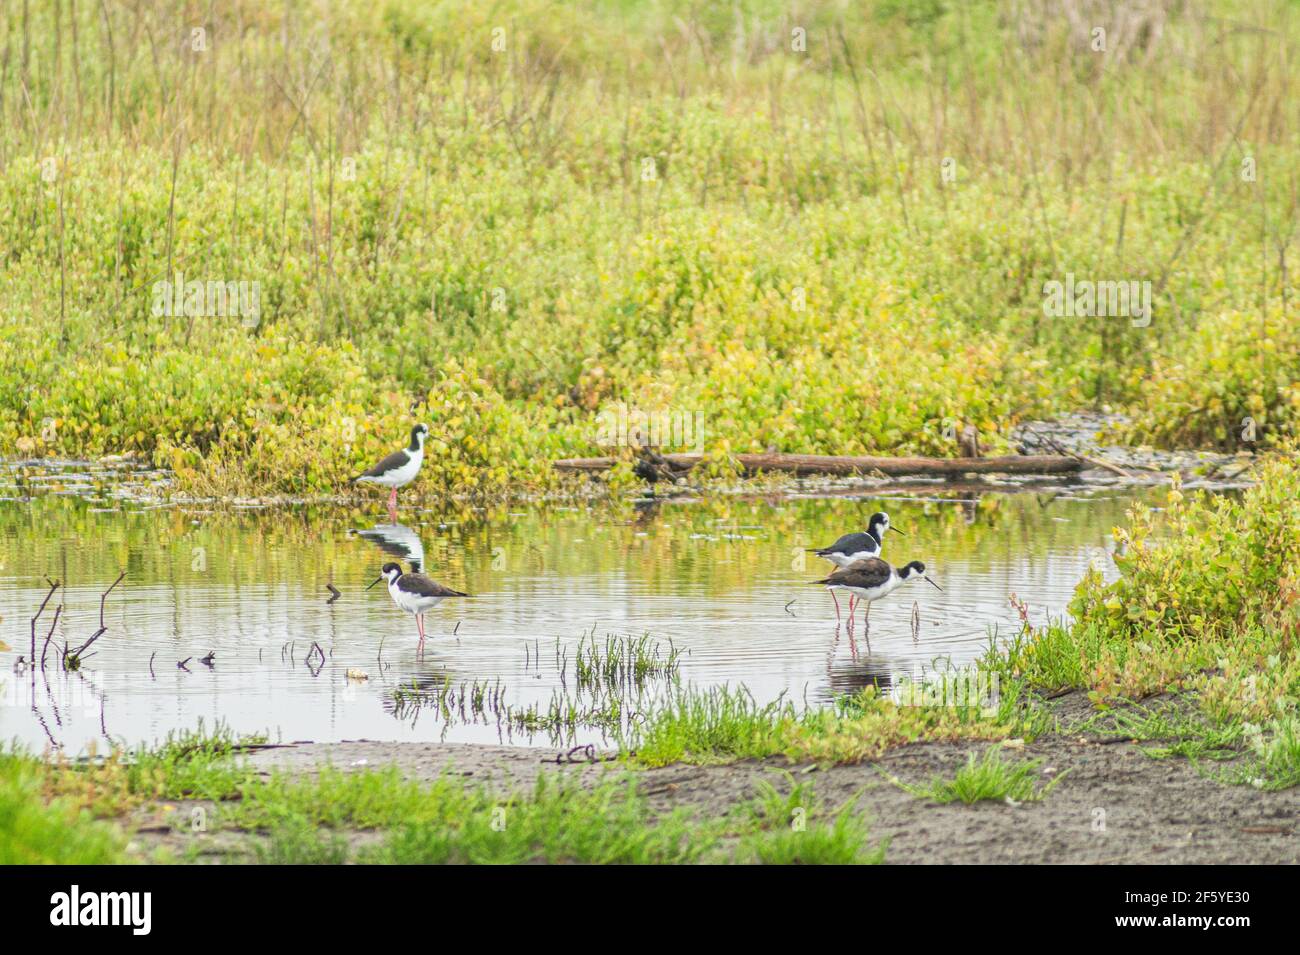 Images of the Maipo wetland, Llolleo, Valparaíso, Chile. Stock Photo